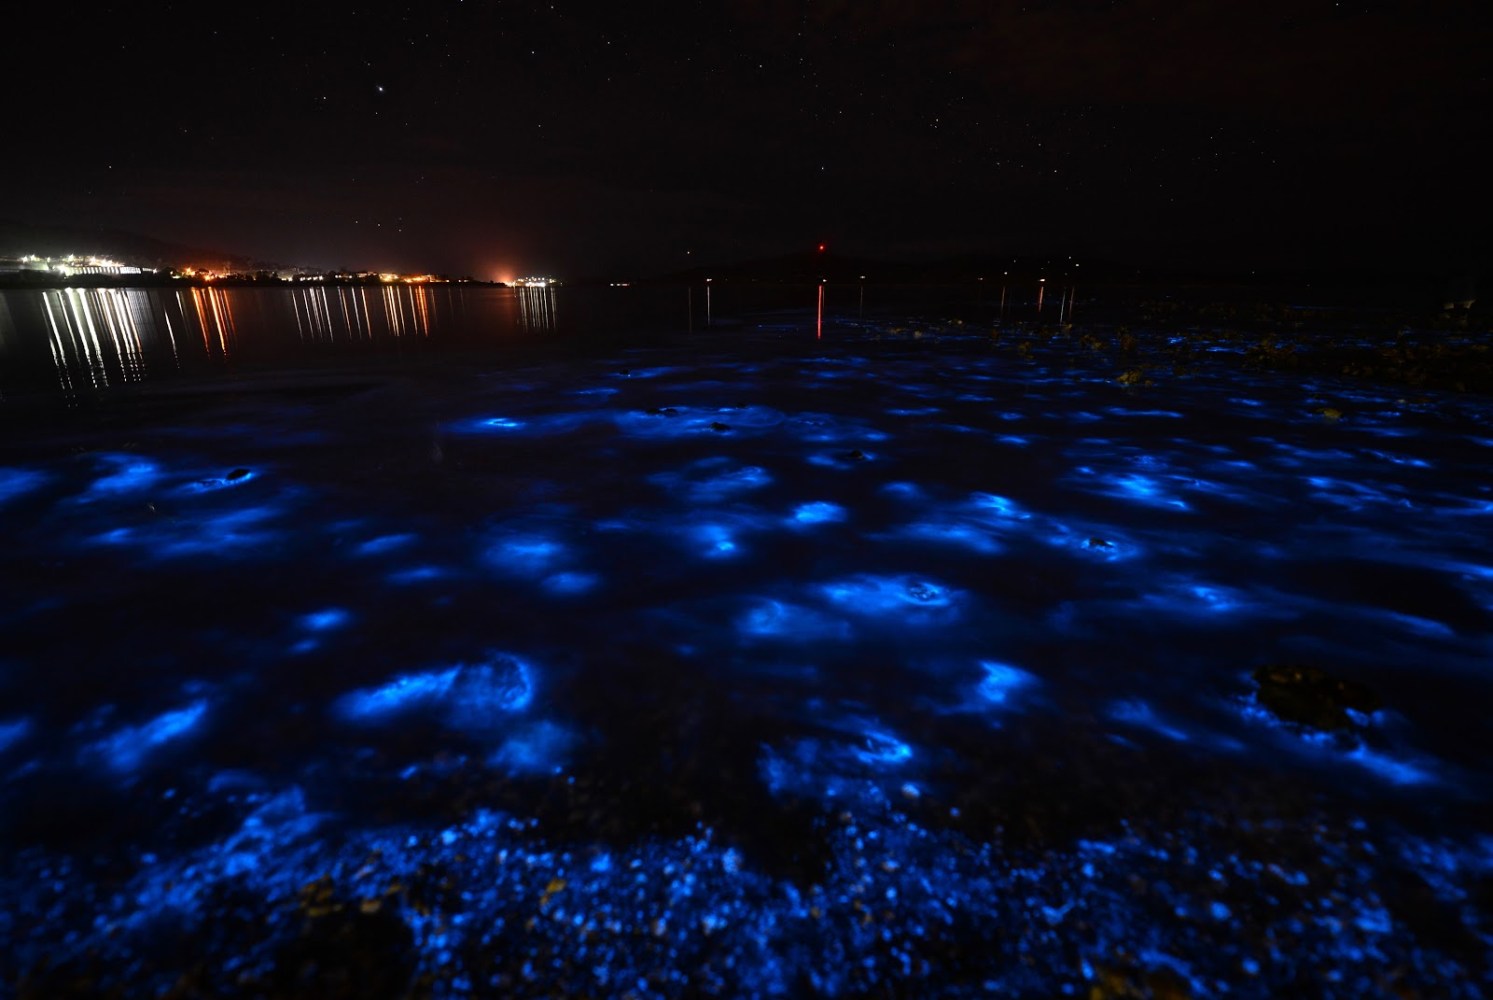 Algae in a bioluminescent glowing in the water at night